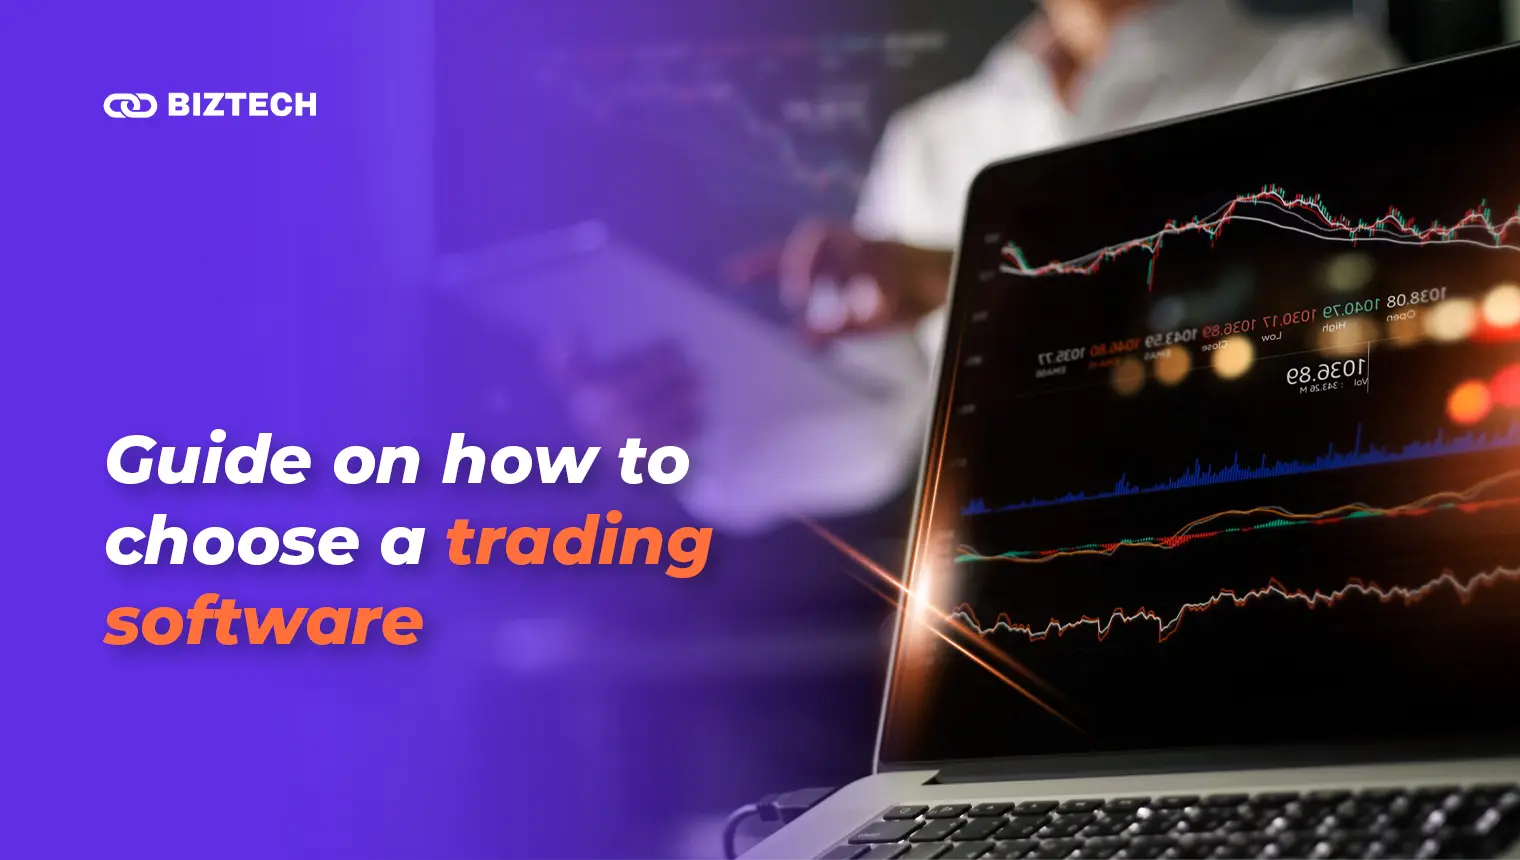 Guide on how to choose a trading software